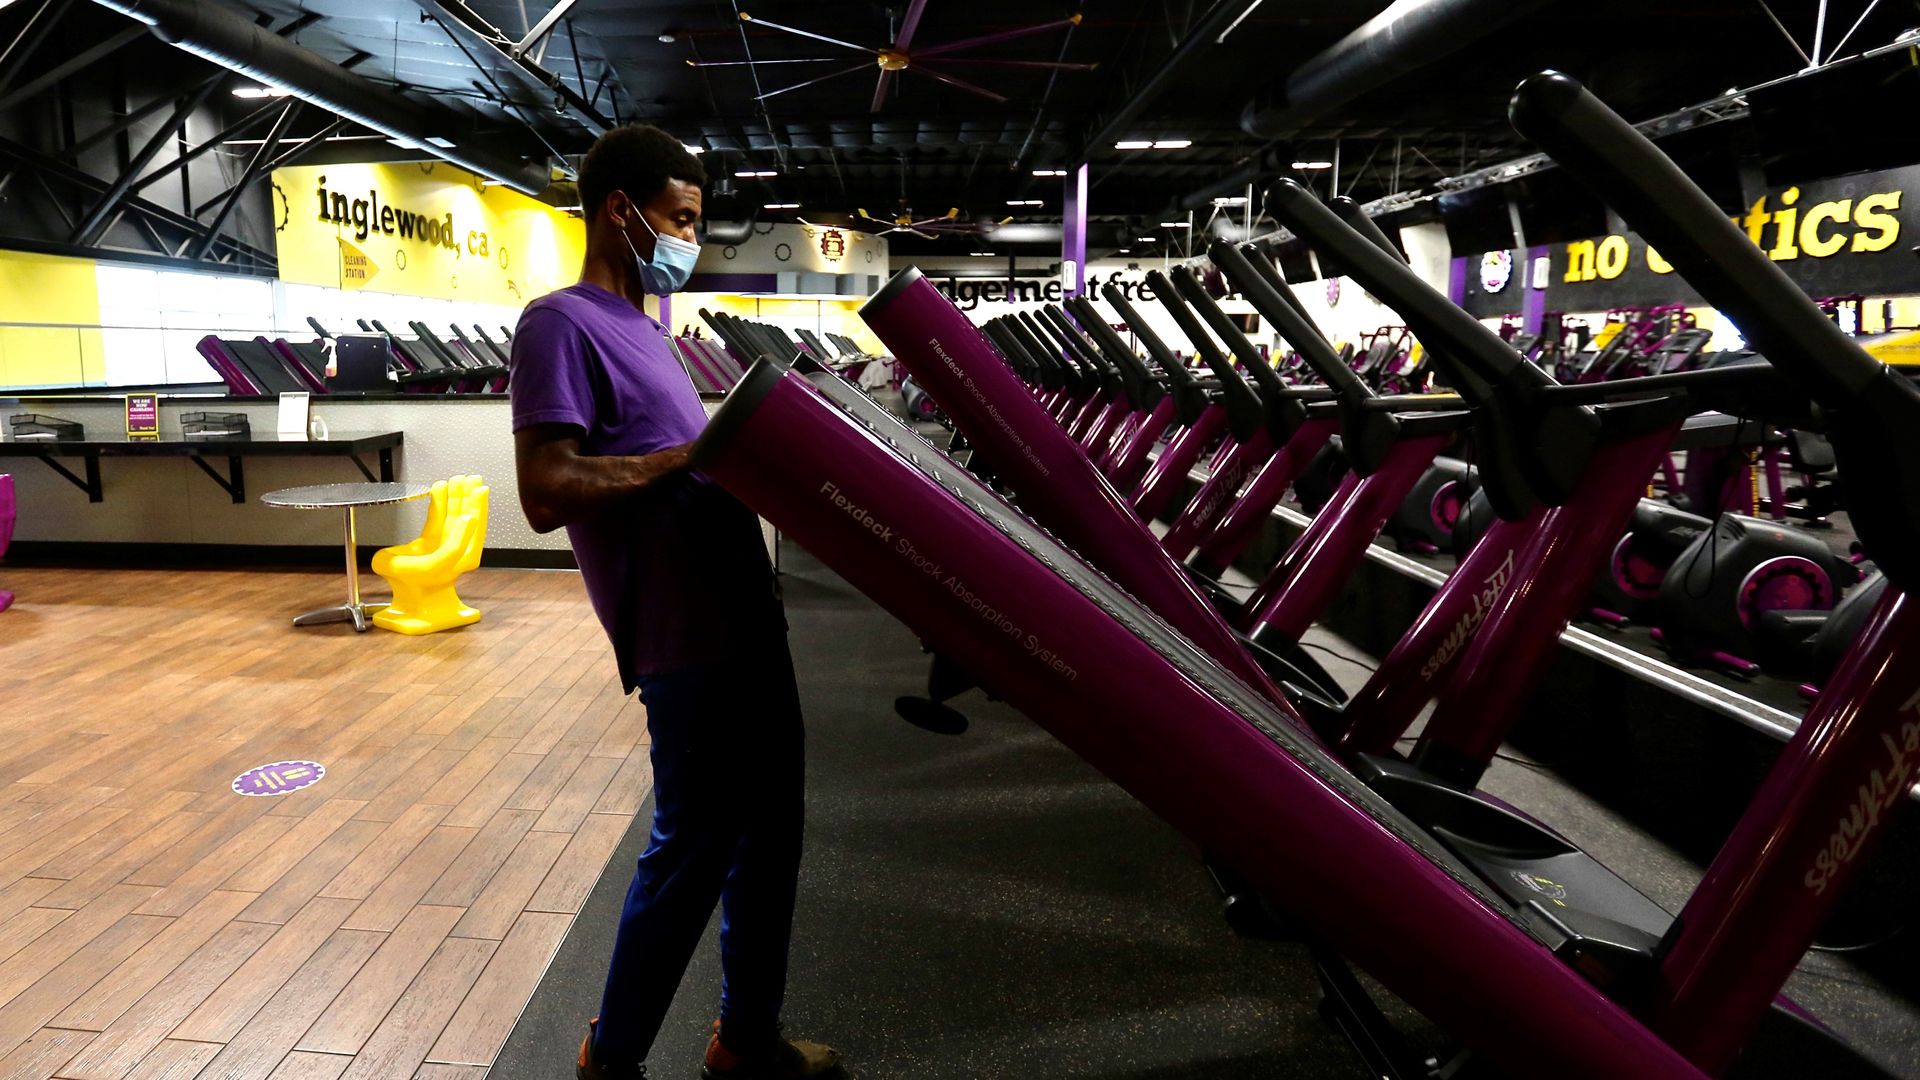 A worker unfurls a folded-up treadmill at a Planet Fitness location.